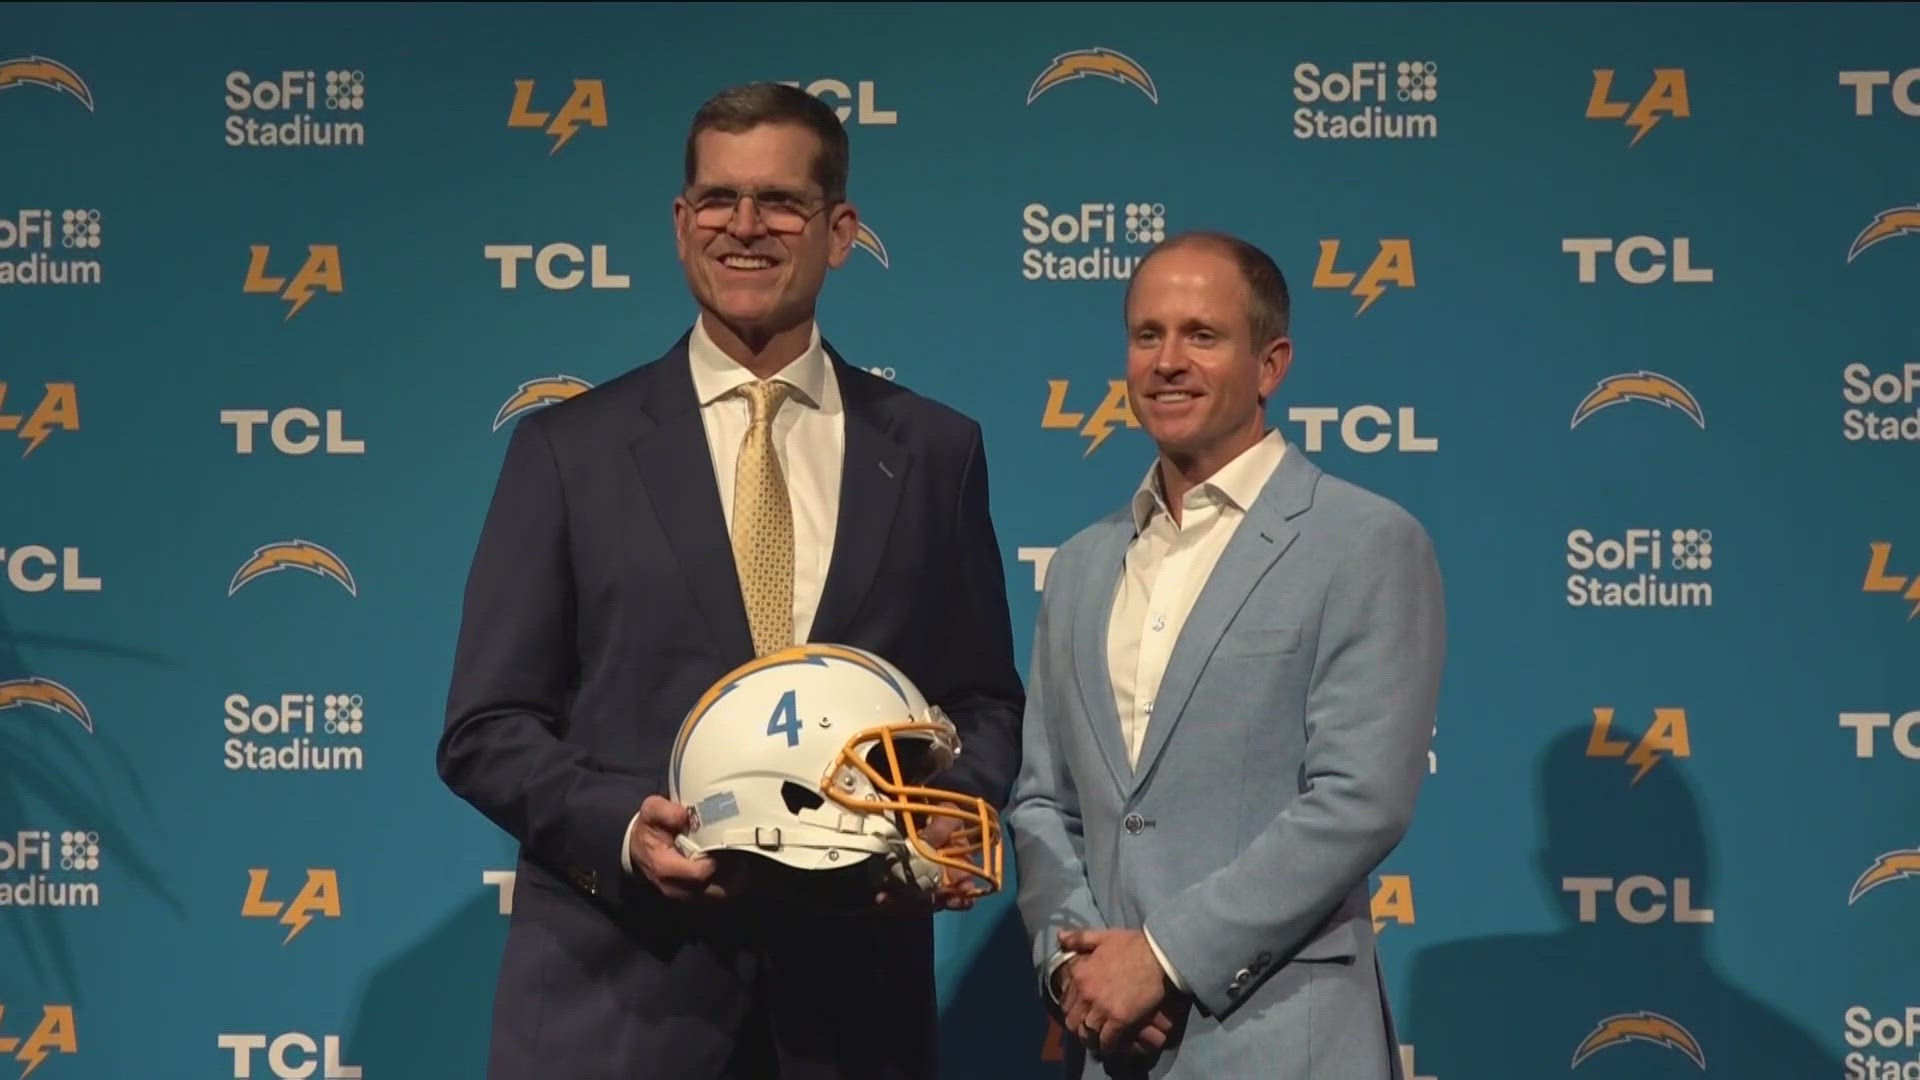 During a ceremony at SoFi Stadium on Thursday, the Los Angeles Chargers introduced their new head coach Jim Harbaugh.